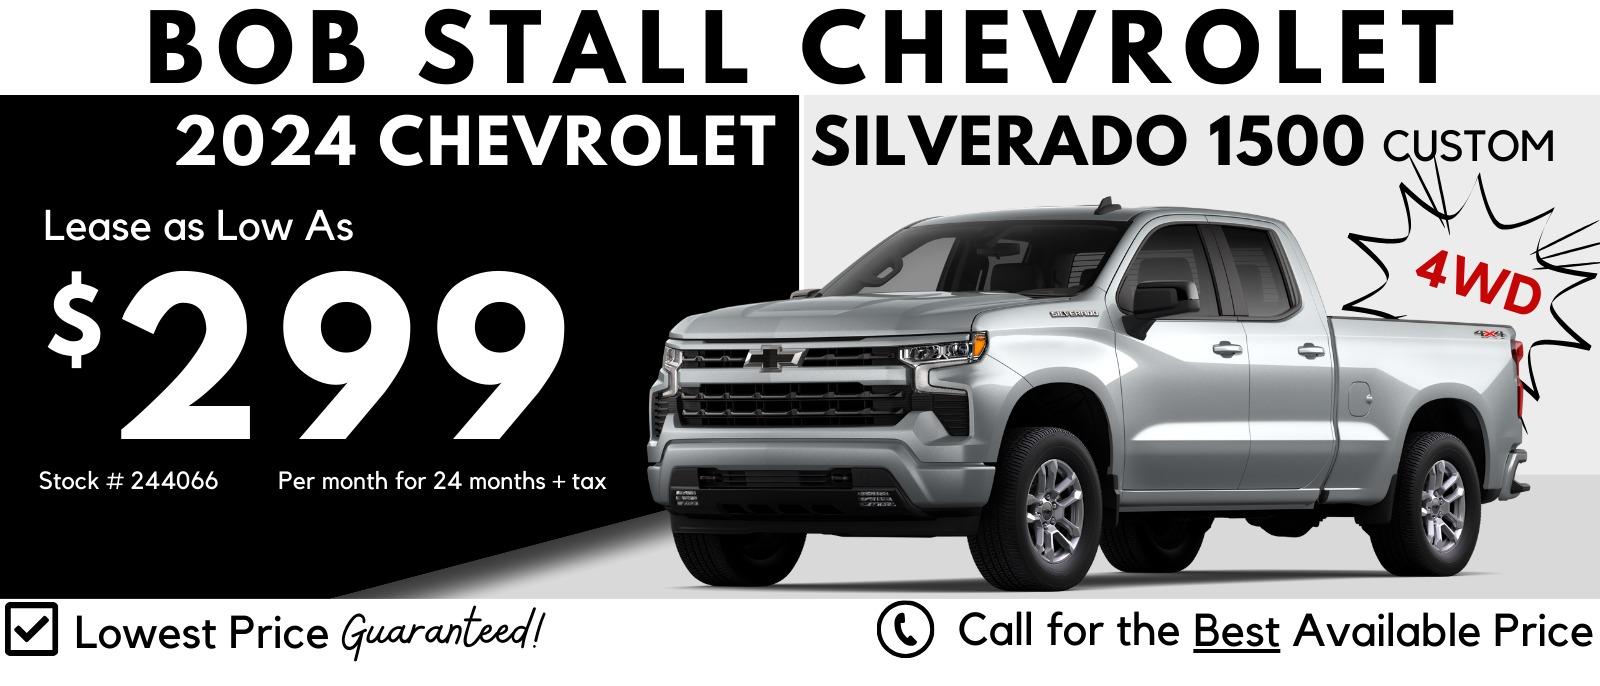 Silverado 2024  Savings - Lease as low as $299 per month for 24 Months